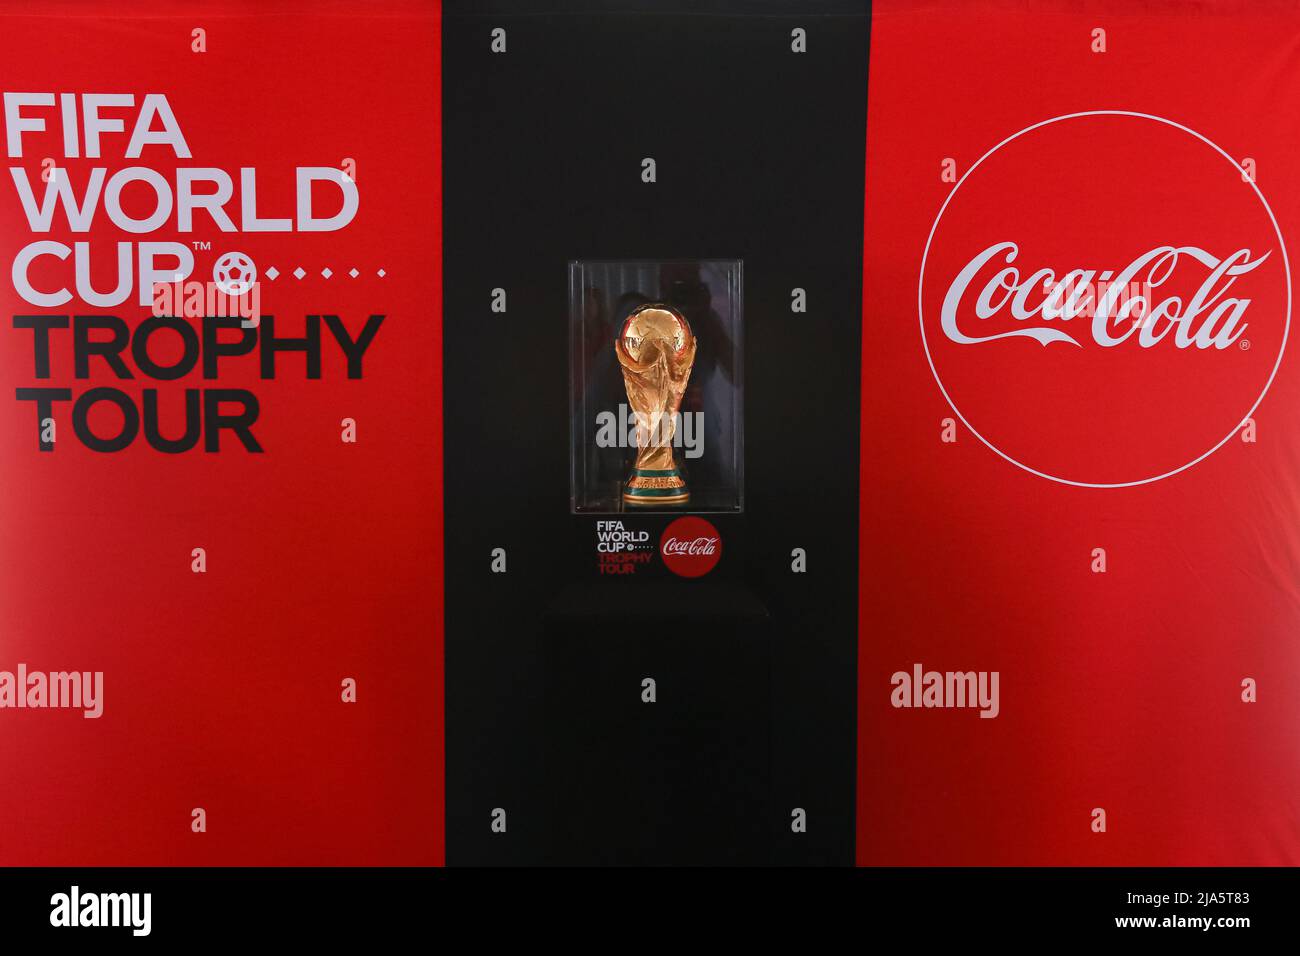 The FIFA World Cup trophy (C) seen on display at the Kenyatta International Convention Centre during the public viewing event. The Worldwide tour of the FIFA world cup trophy will cover at least 22 countries, including Kenya. Stock Photo